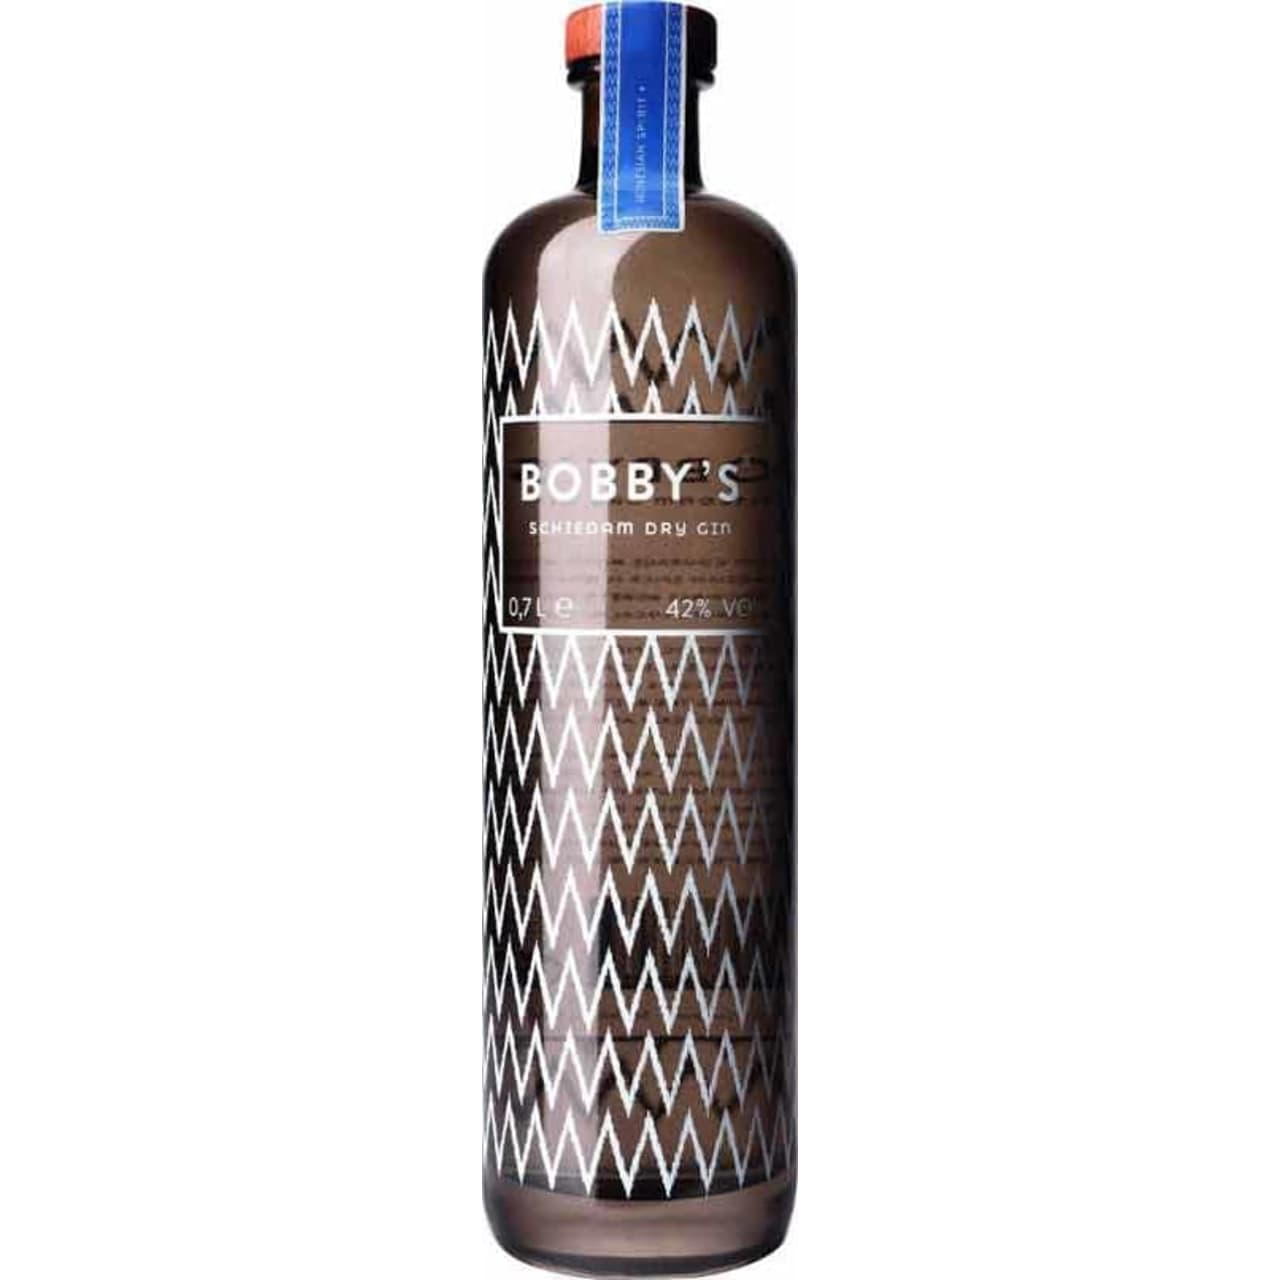 Bobby’s is a unique blend of Indonesian spice and traditional botanicals.